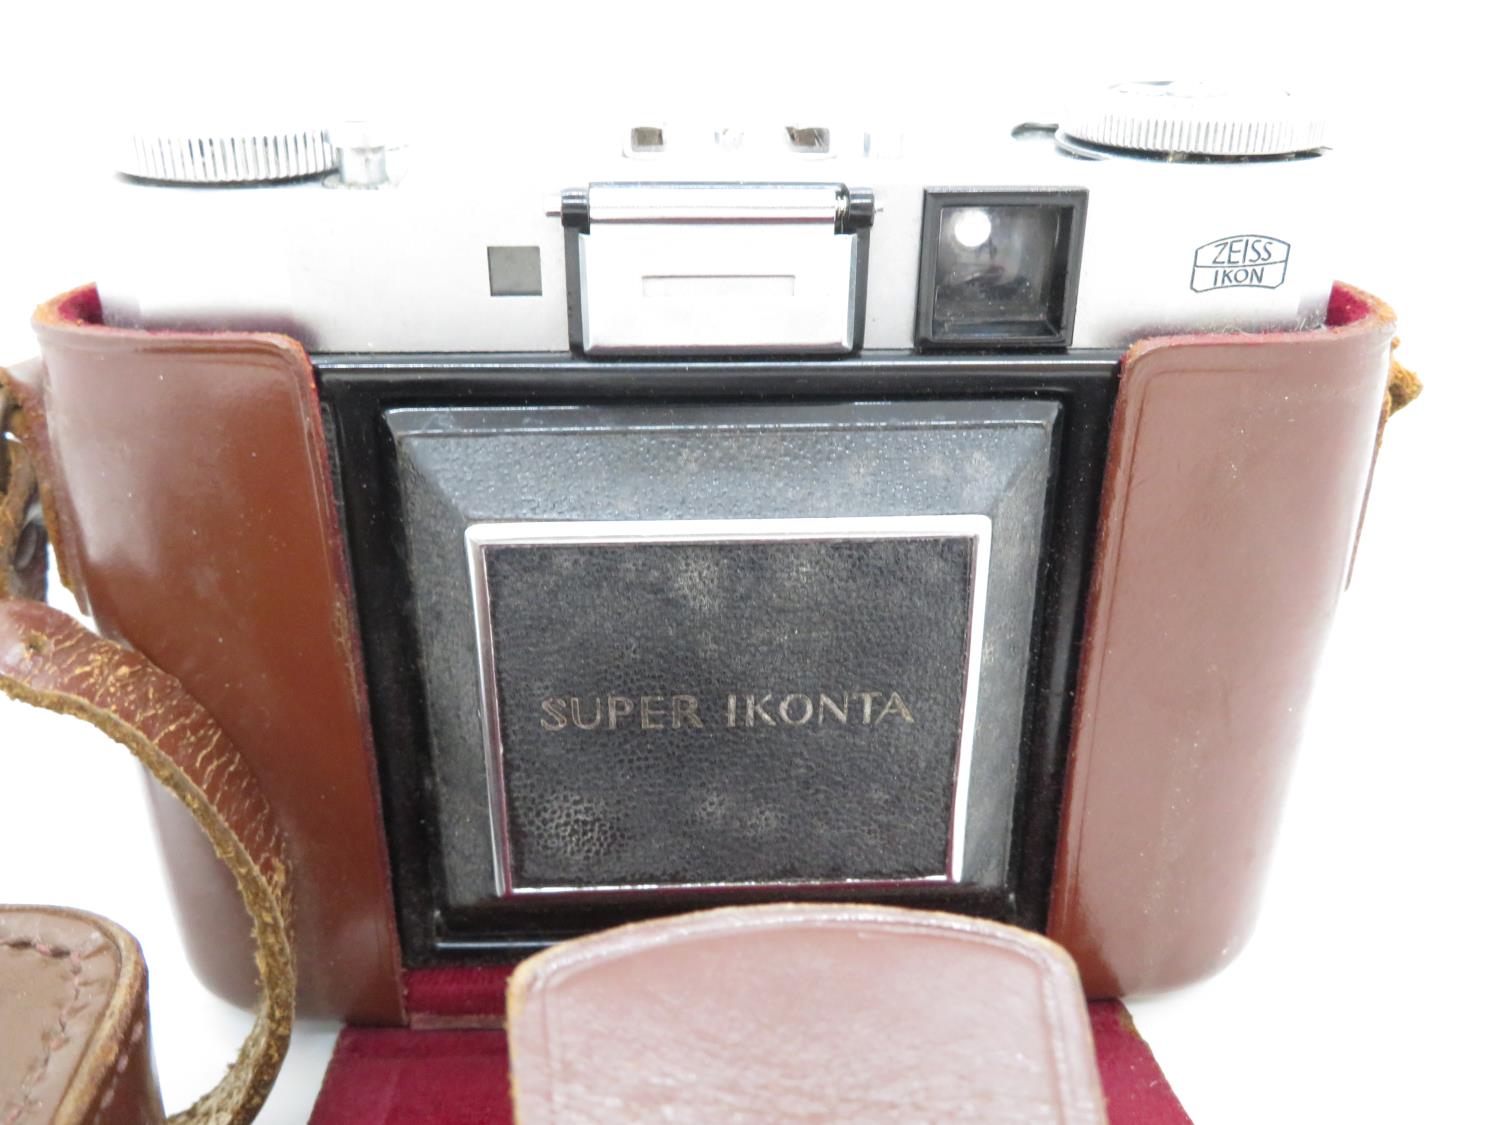 Zeiss Ikon Super Ikonta camera with box, strap and lens - Image 2 of 4